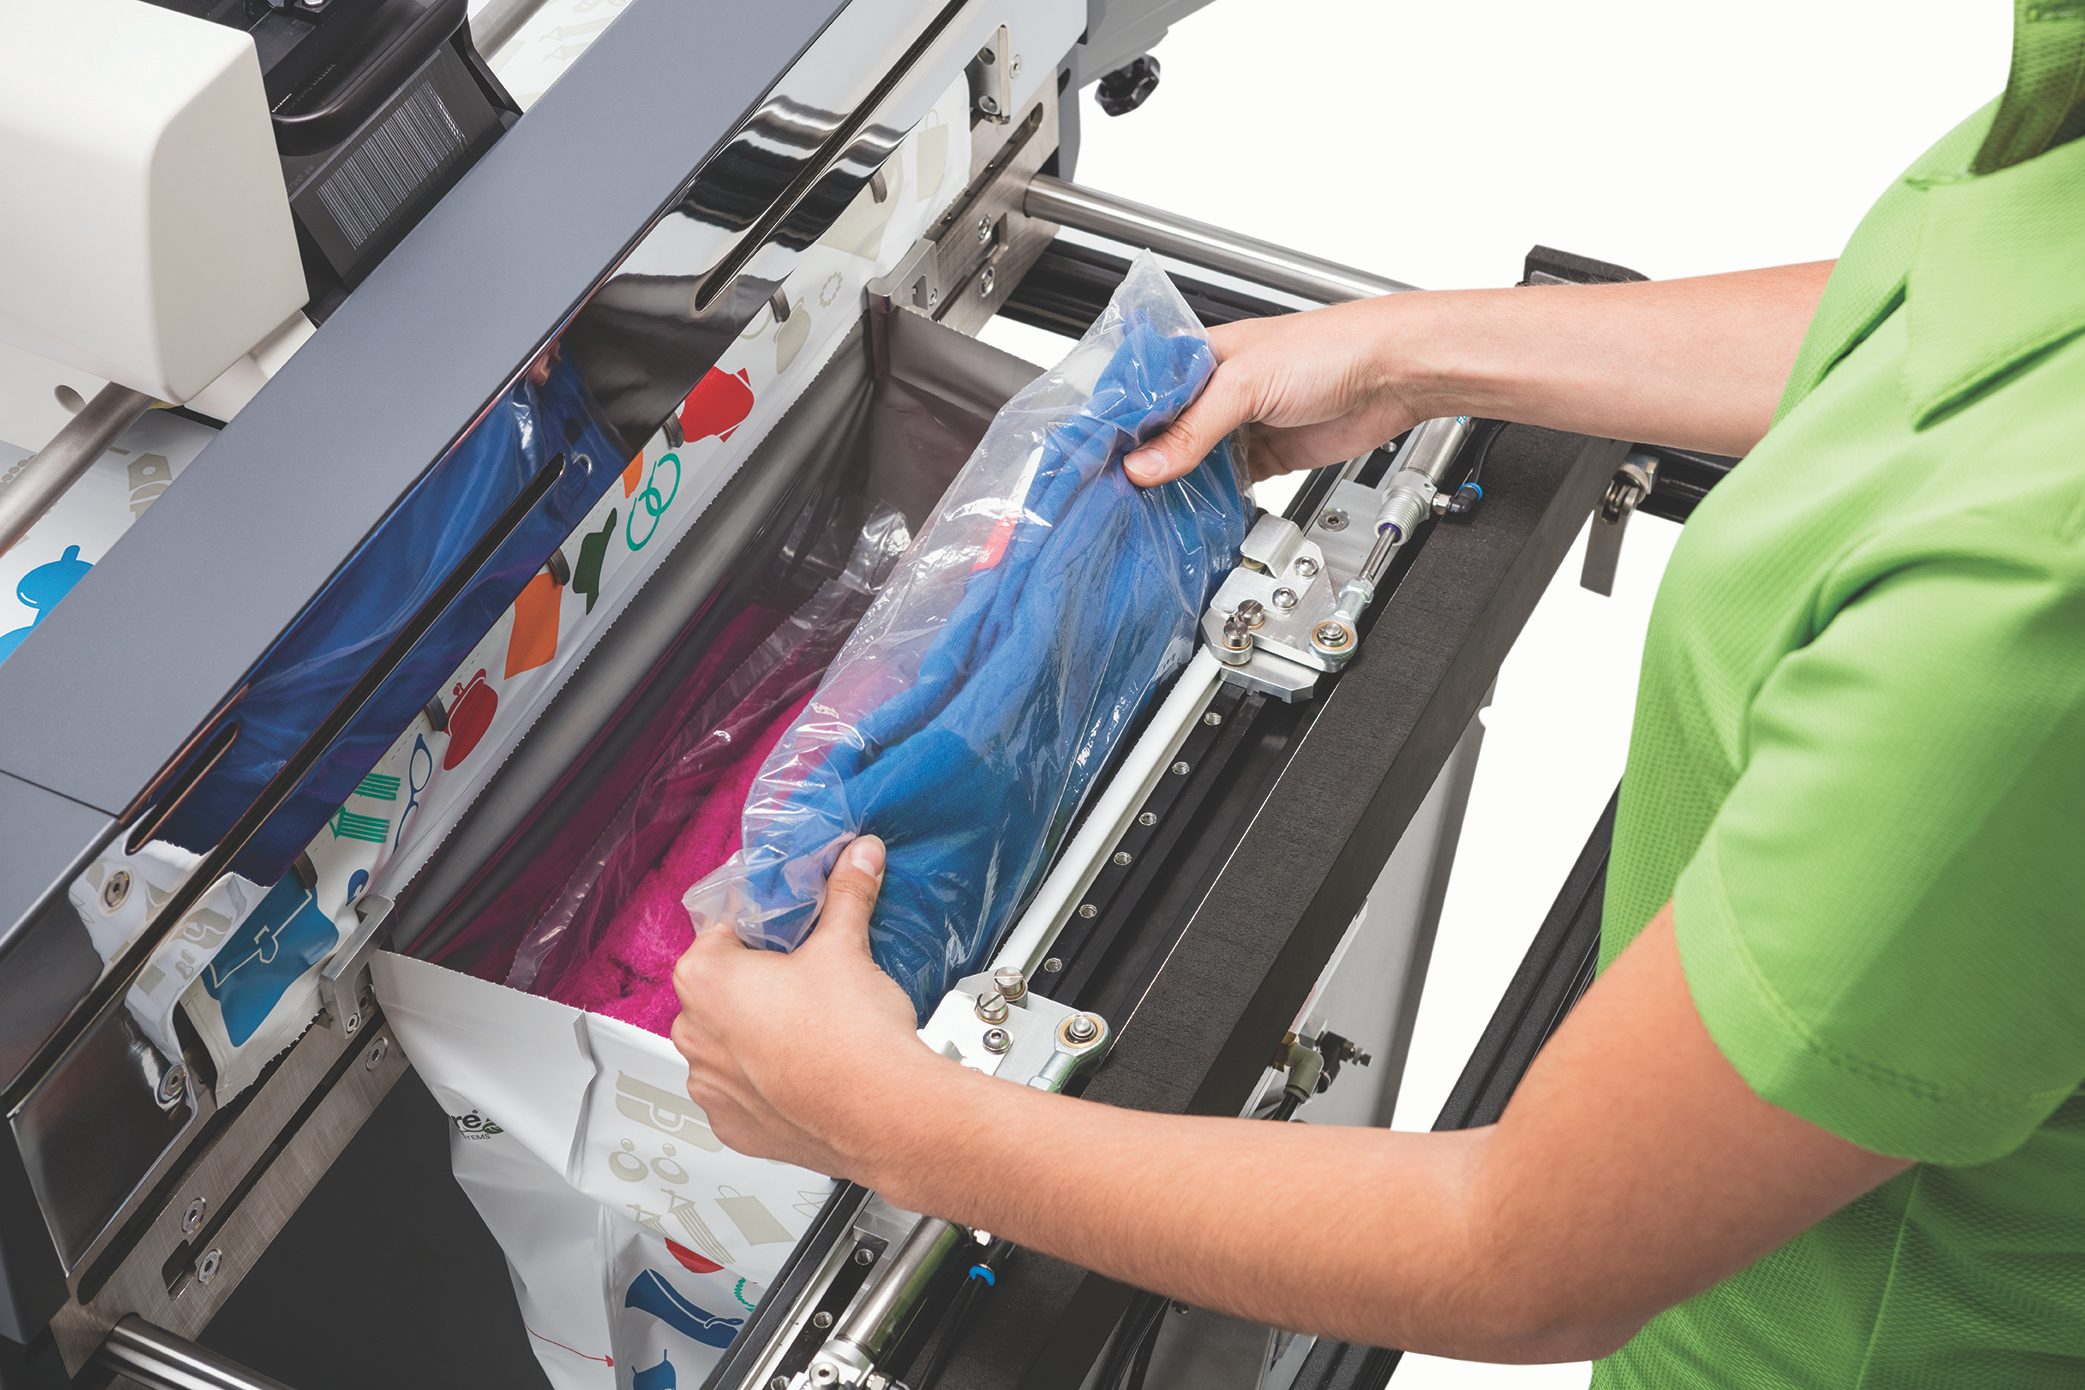 high-speed bagging and printing systems